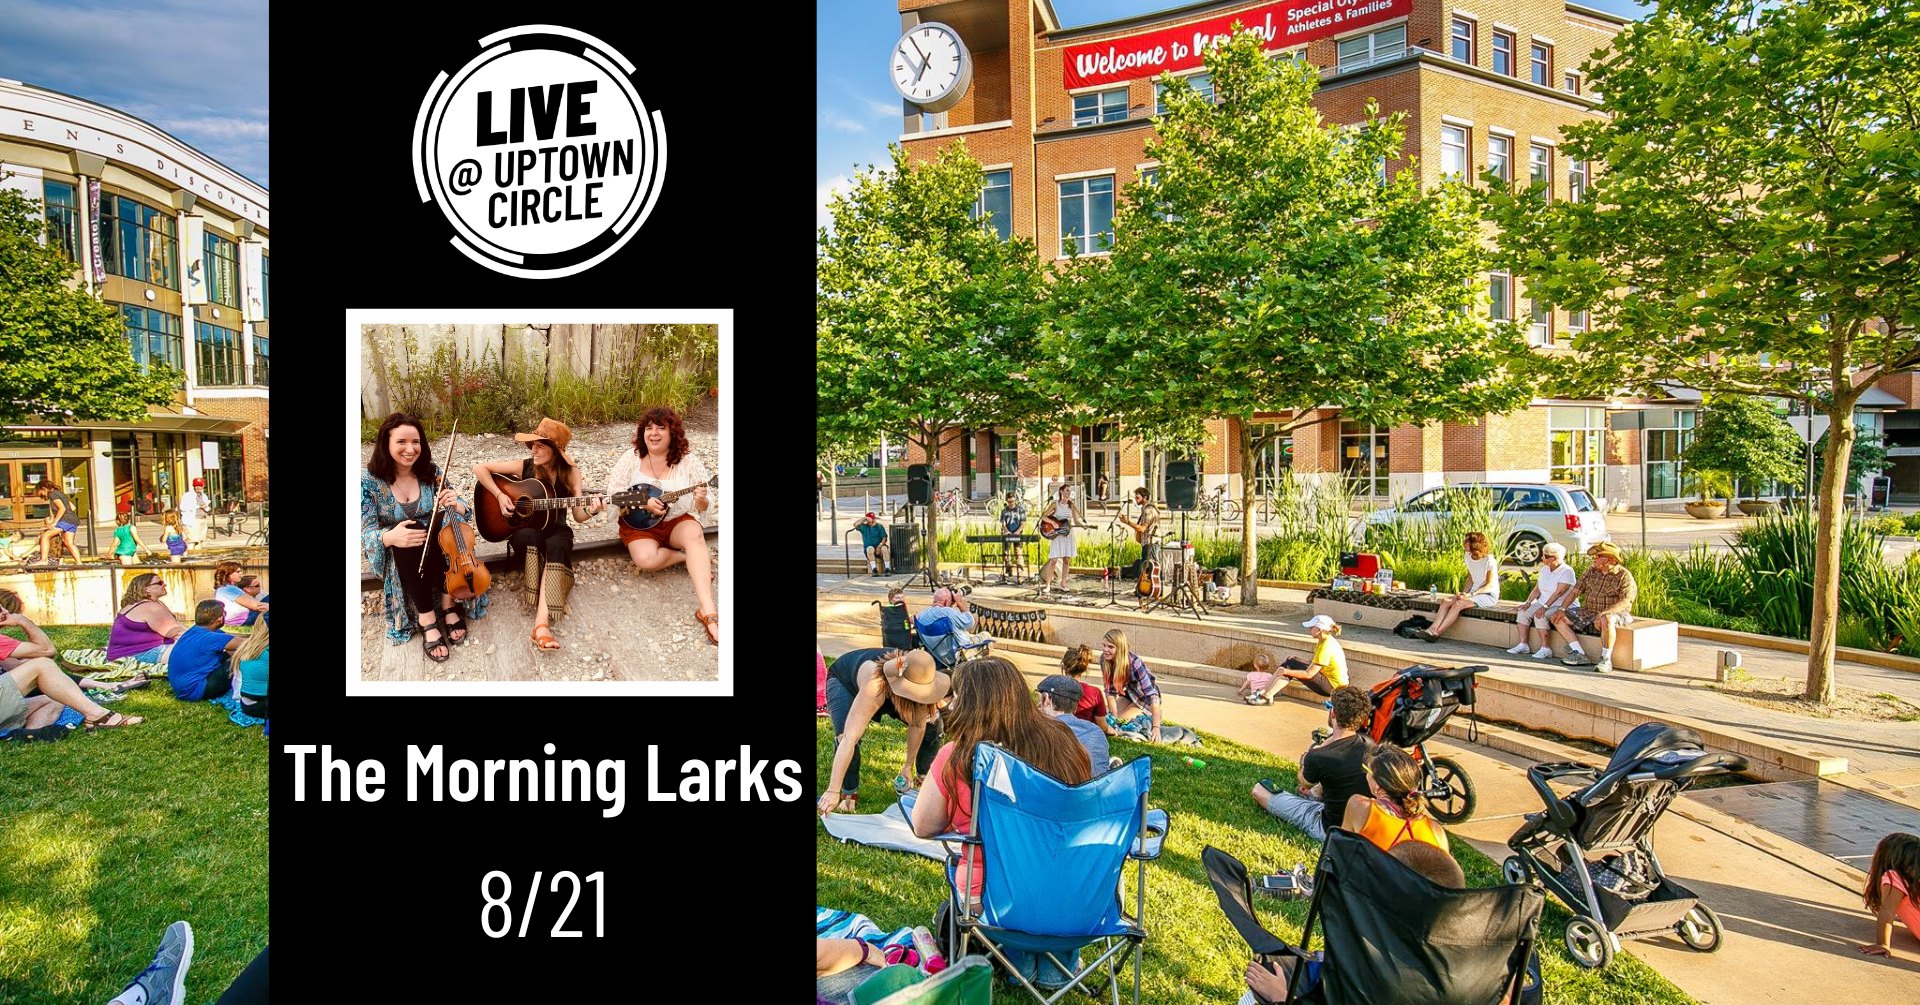 Normal LIVE presents The Morning Larks @ Uptown Circle